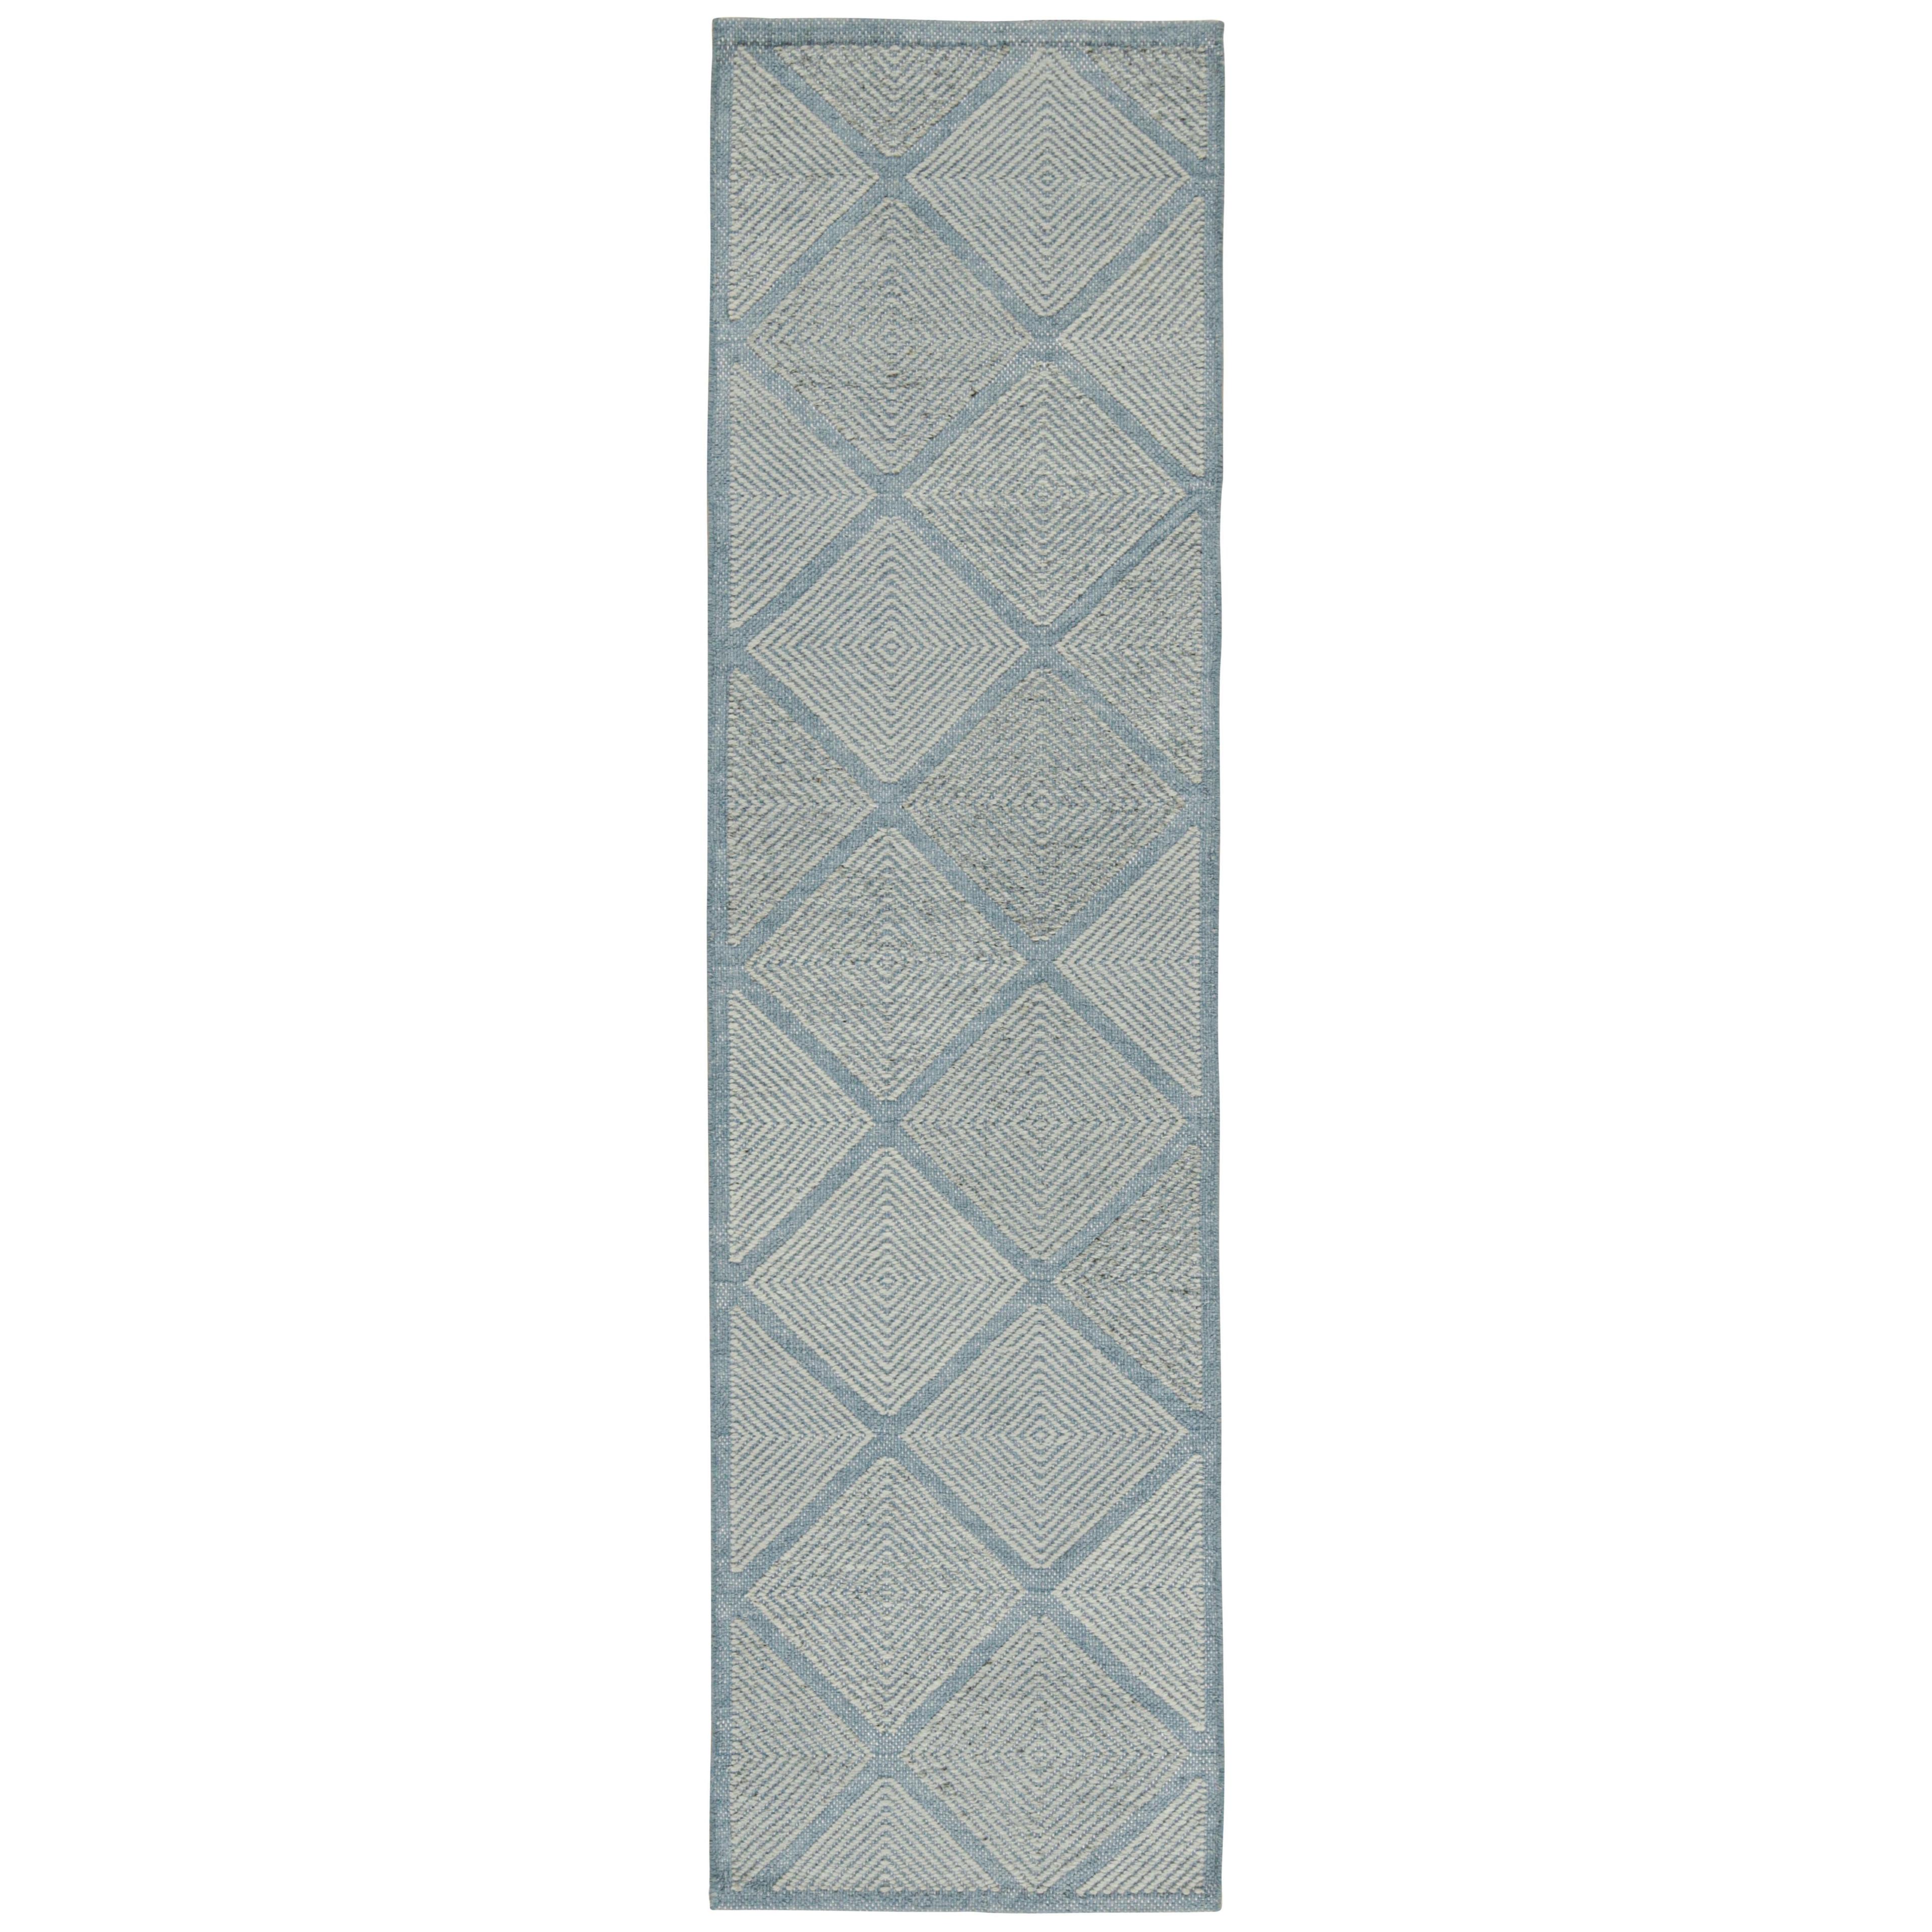 Rug & Kilim’s Scandinavian Style Kilim In Blue With Silver Diamond Patterns